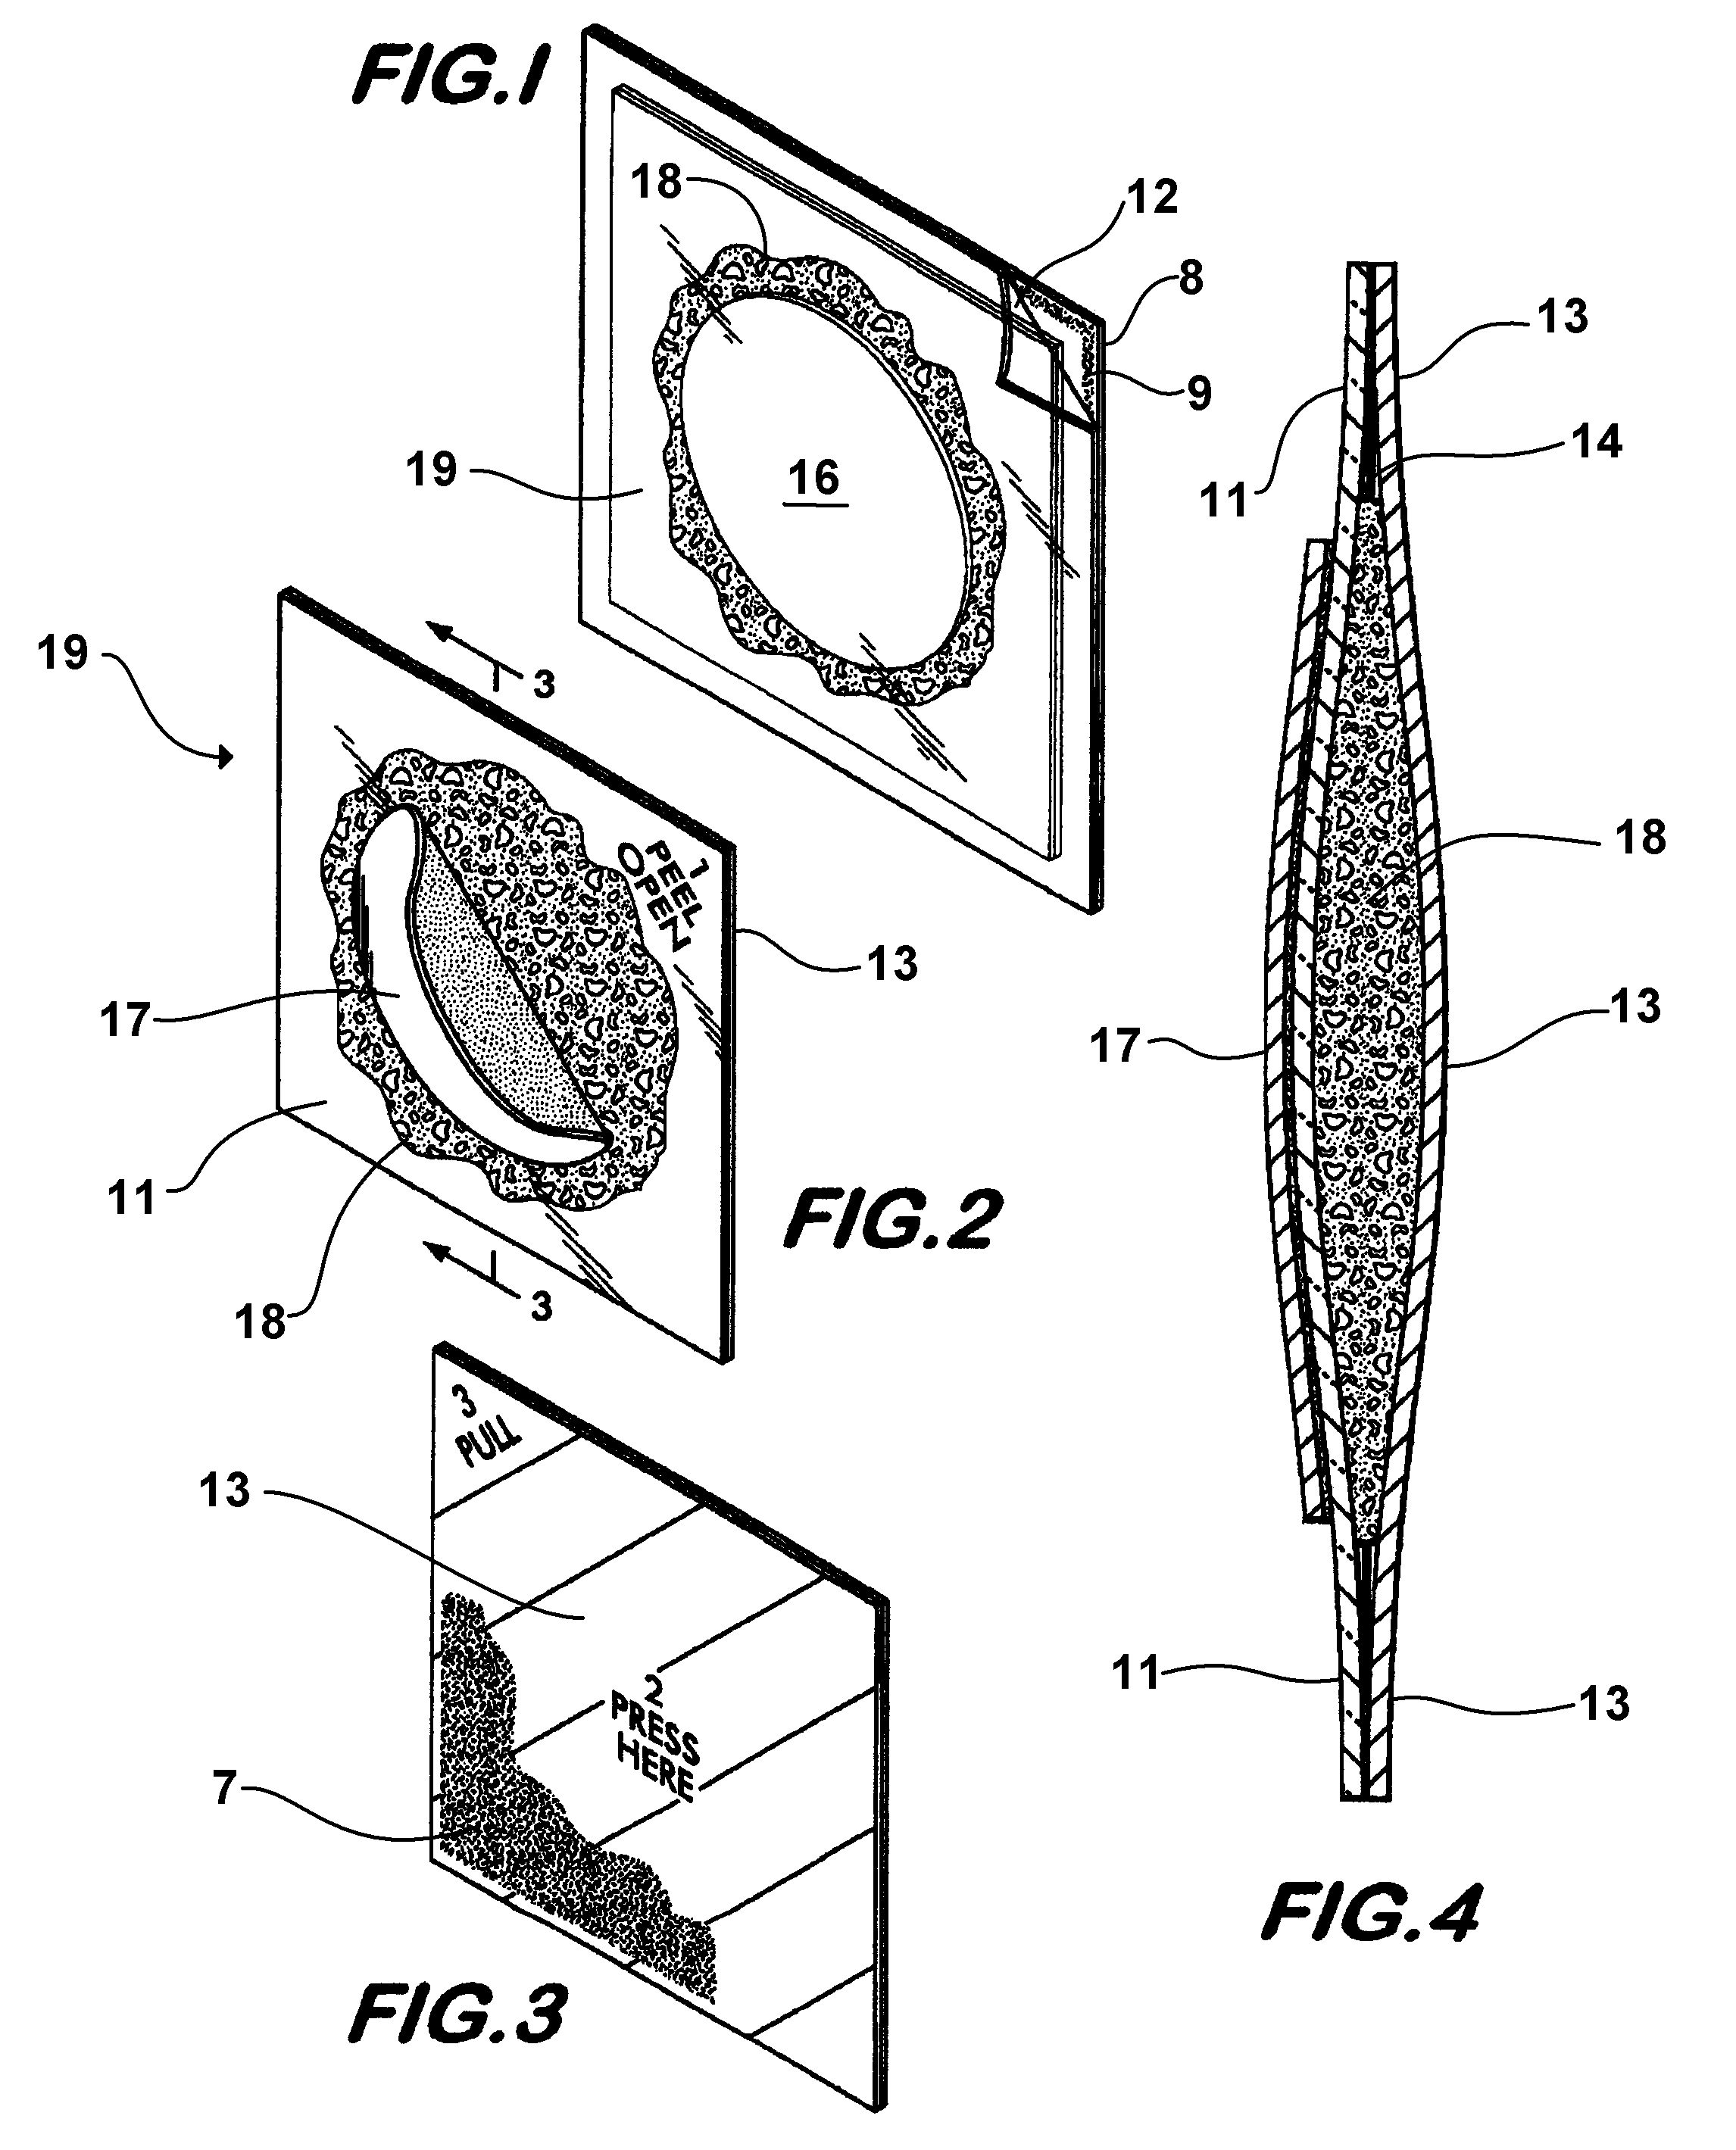 Drywall joint compound applicator for seam and patch surfacing